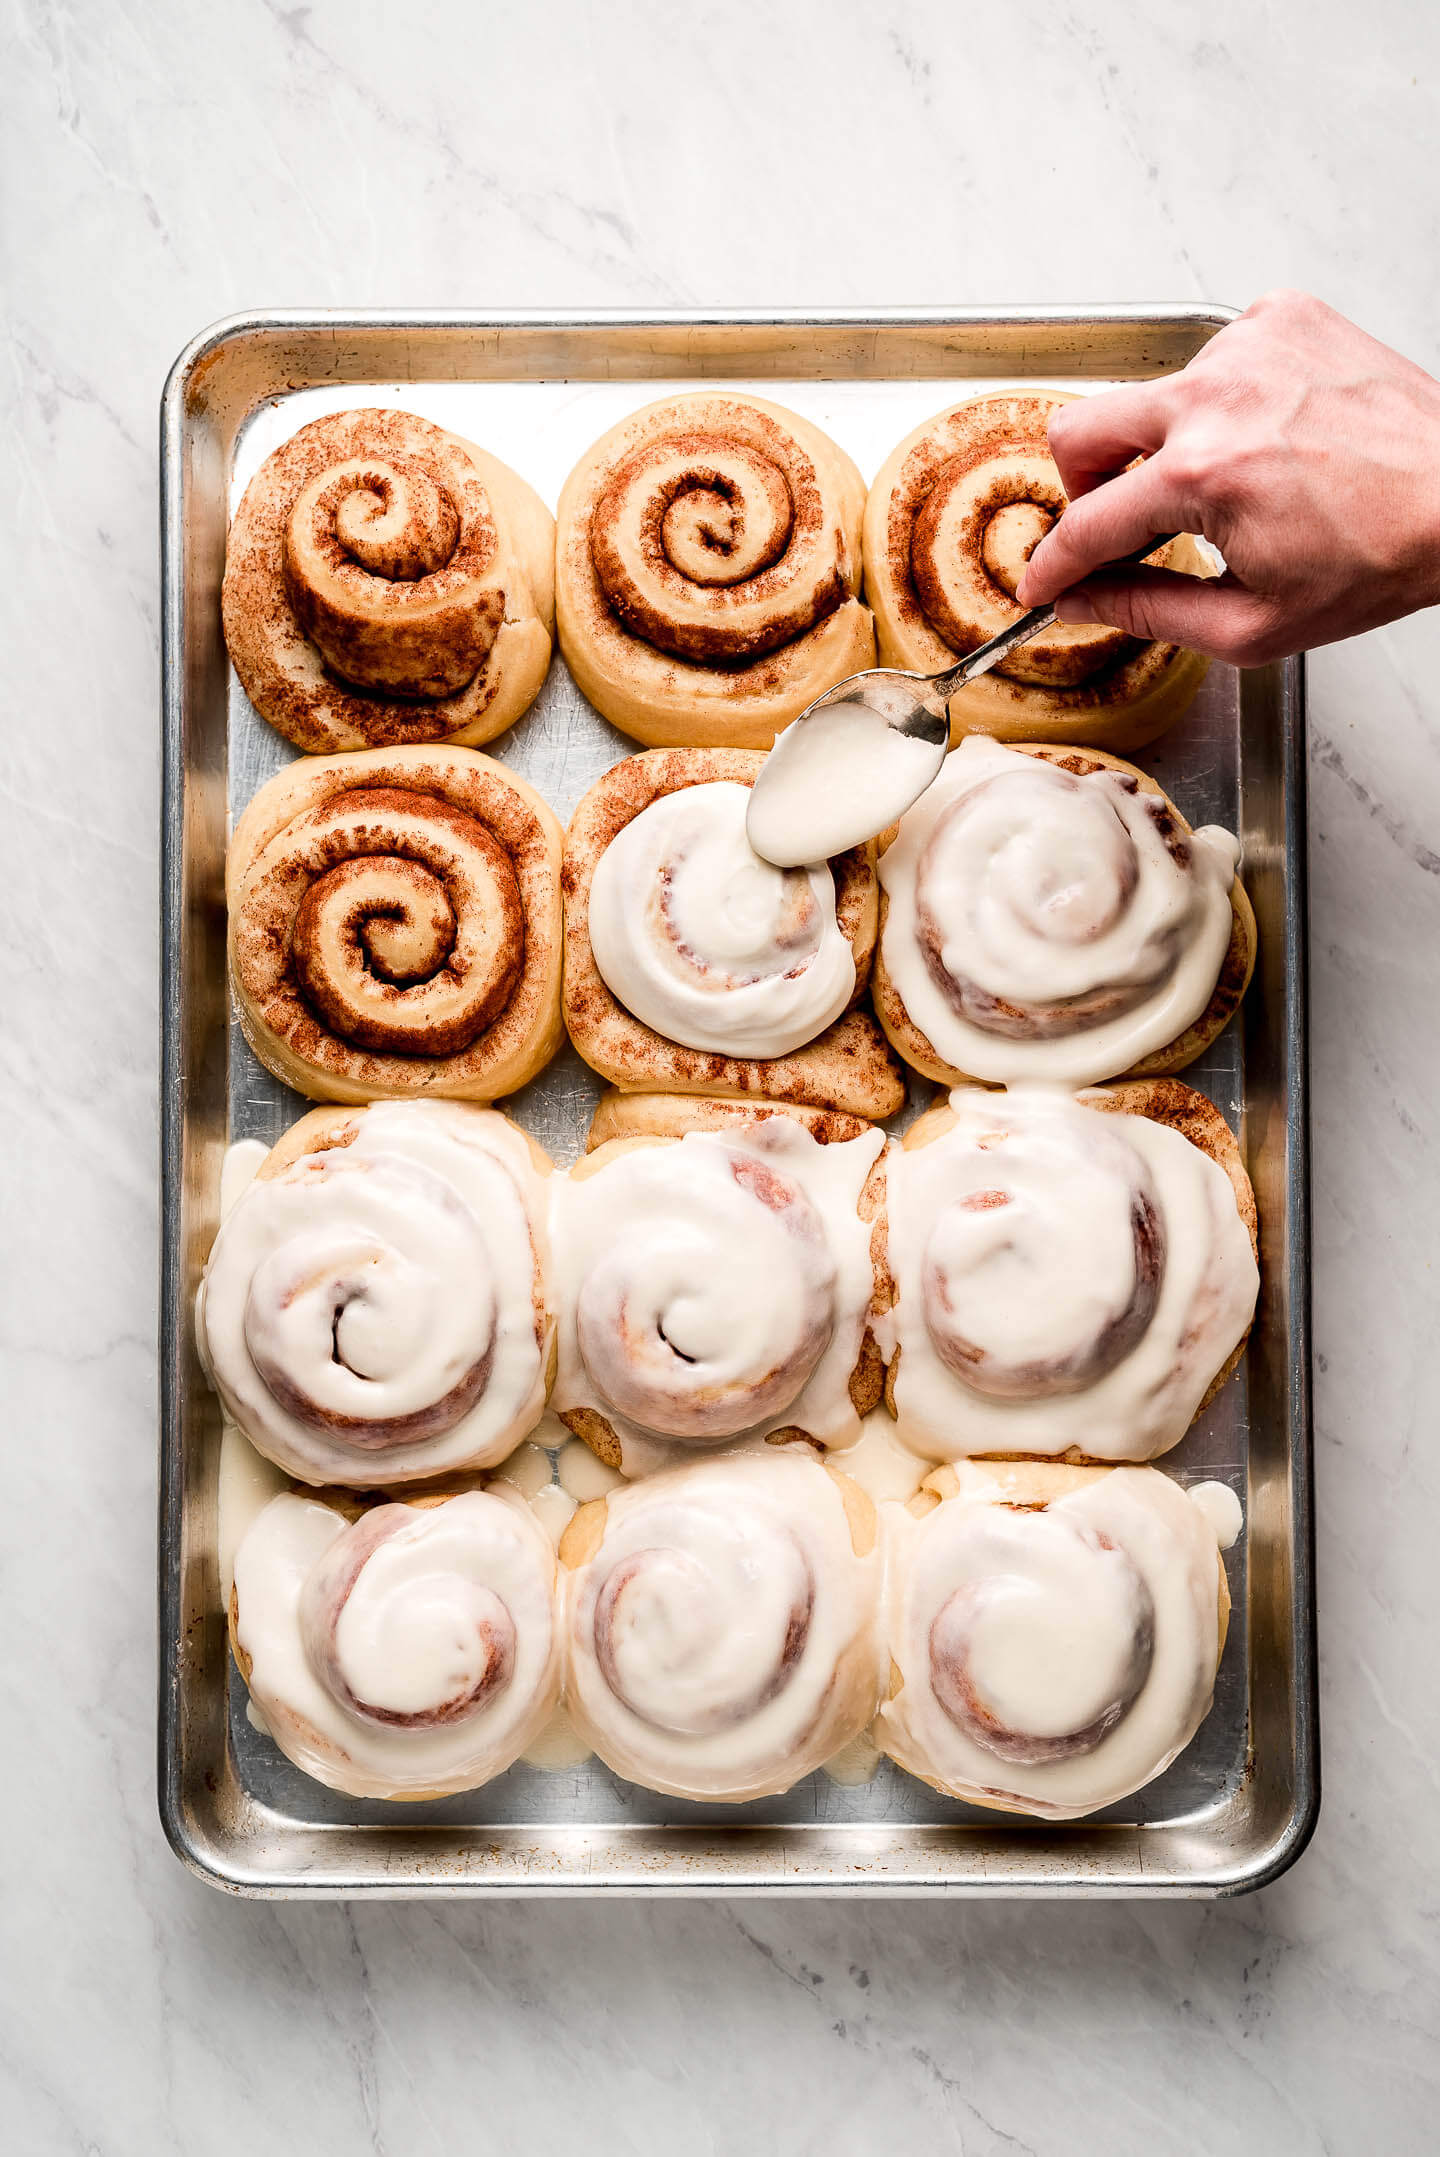 Spreading icing over cinnamon rolls on a sheet pan.